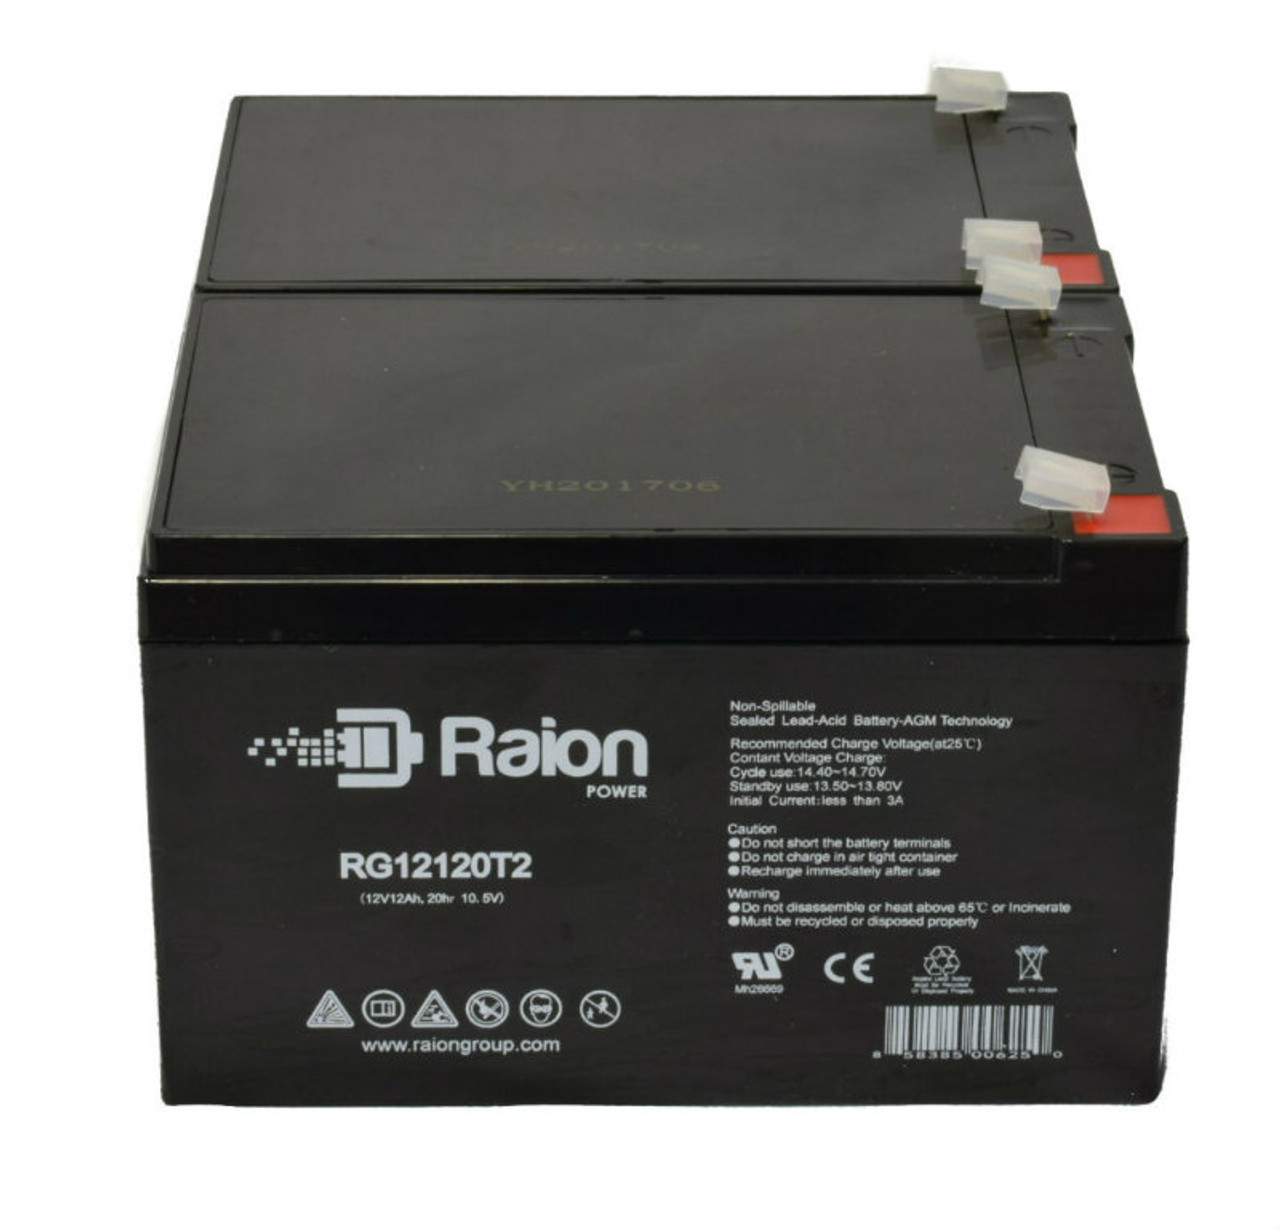 Raion Power RG12120T2 Replacement Battery Set for Zip'r Roo 3- (ZIPROO) Mobility Scooter - 2 Pack